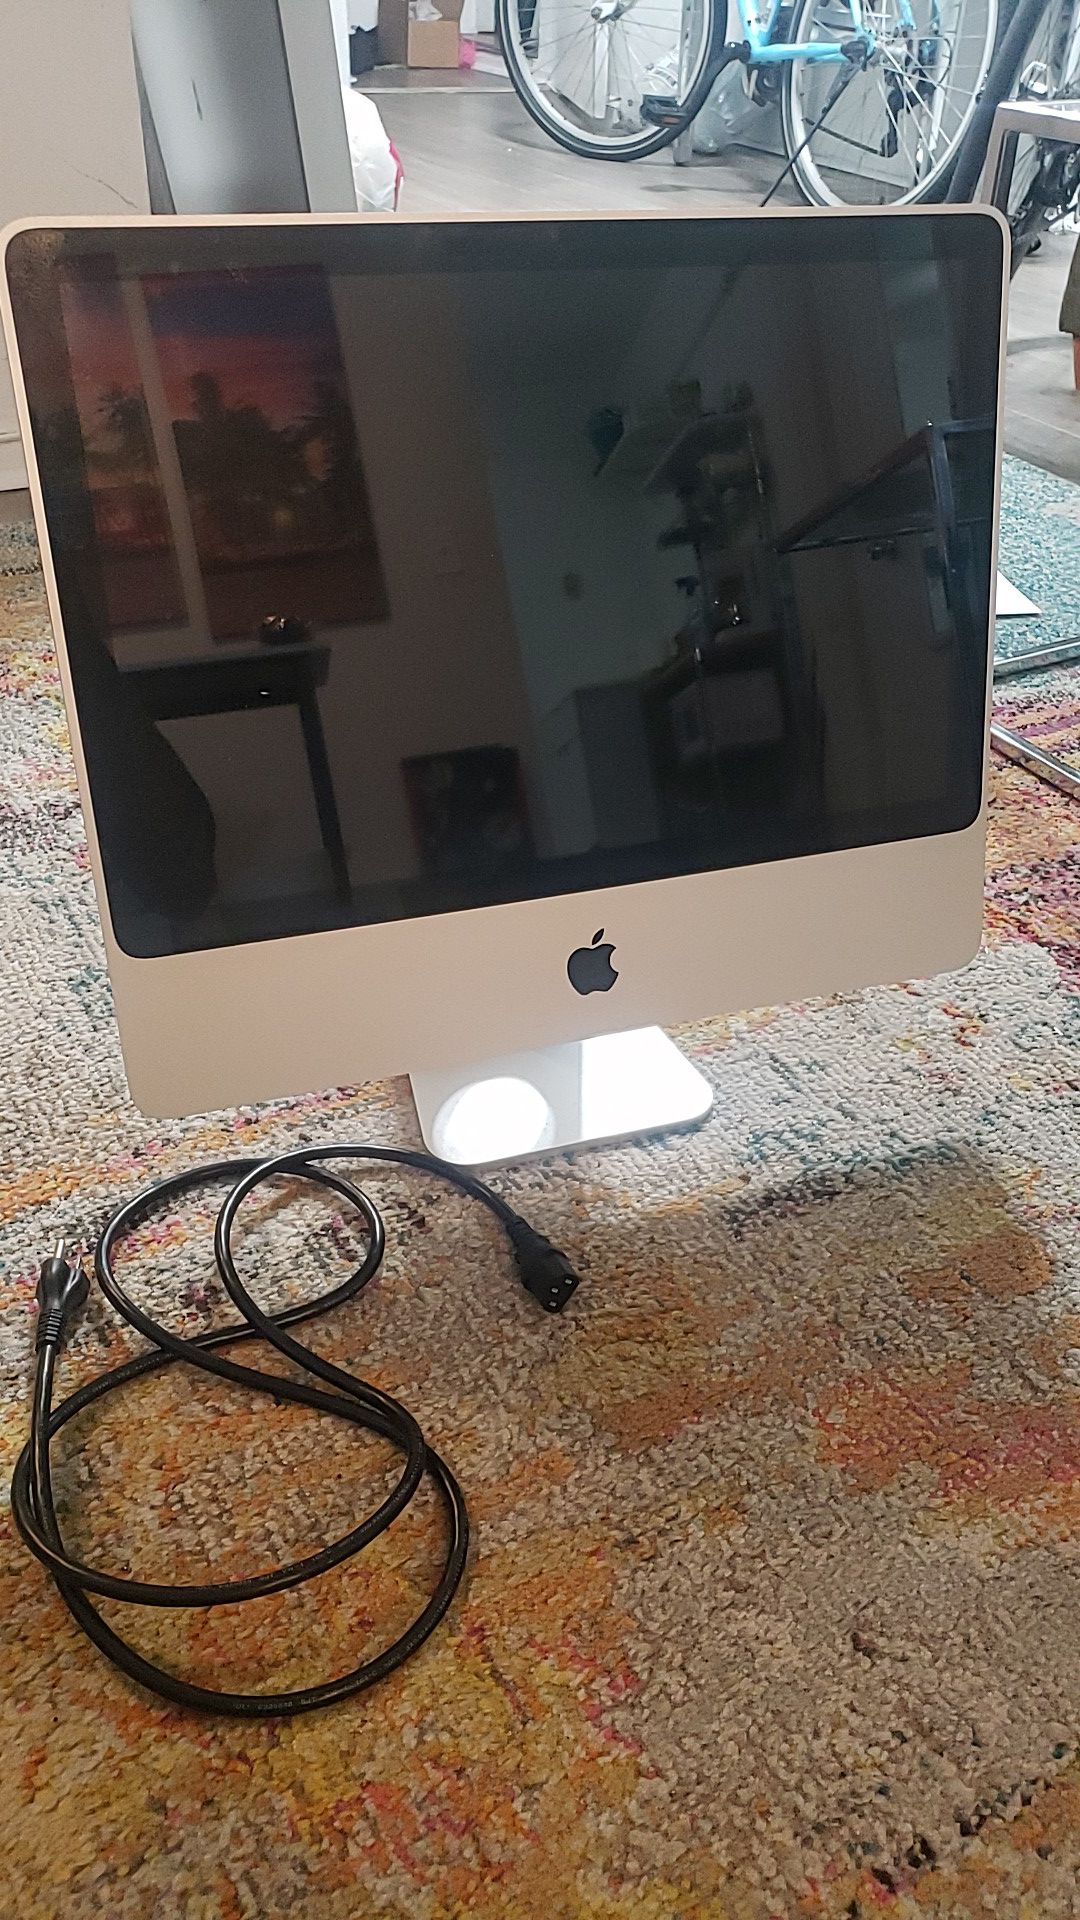 Apple Imac 20inch model A1224 parts unless you can fix it